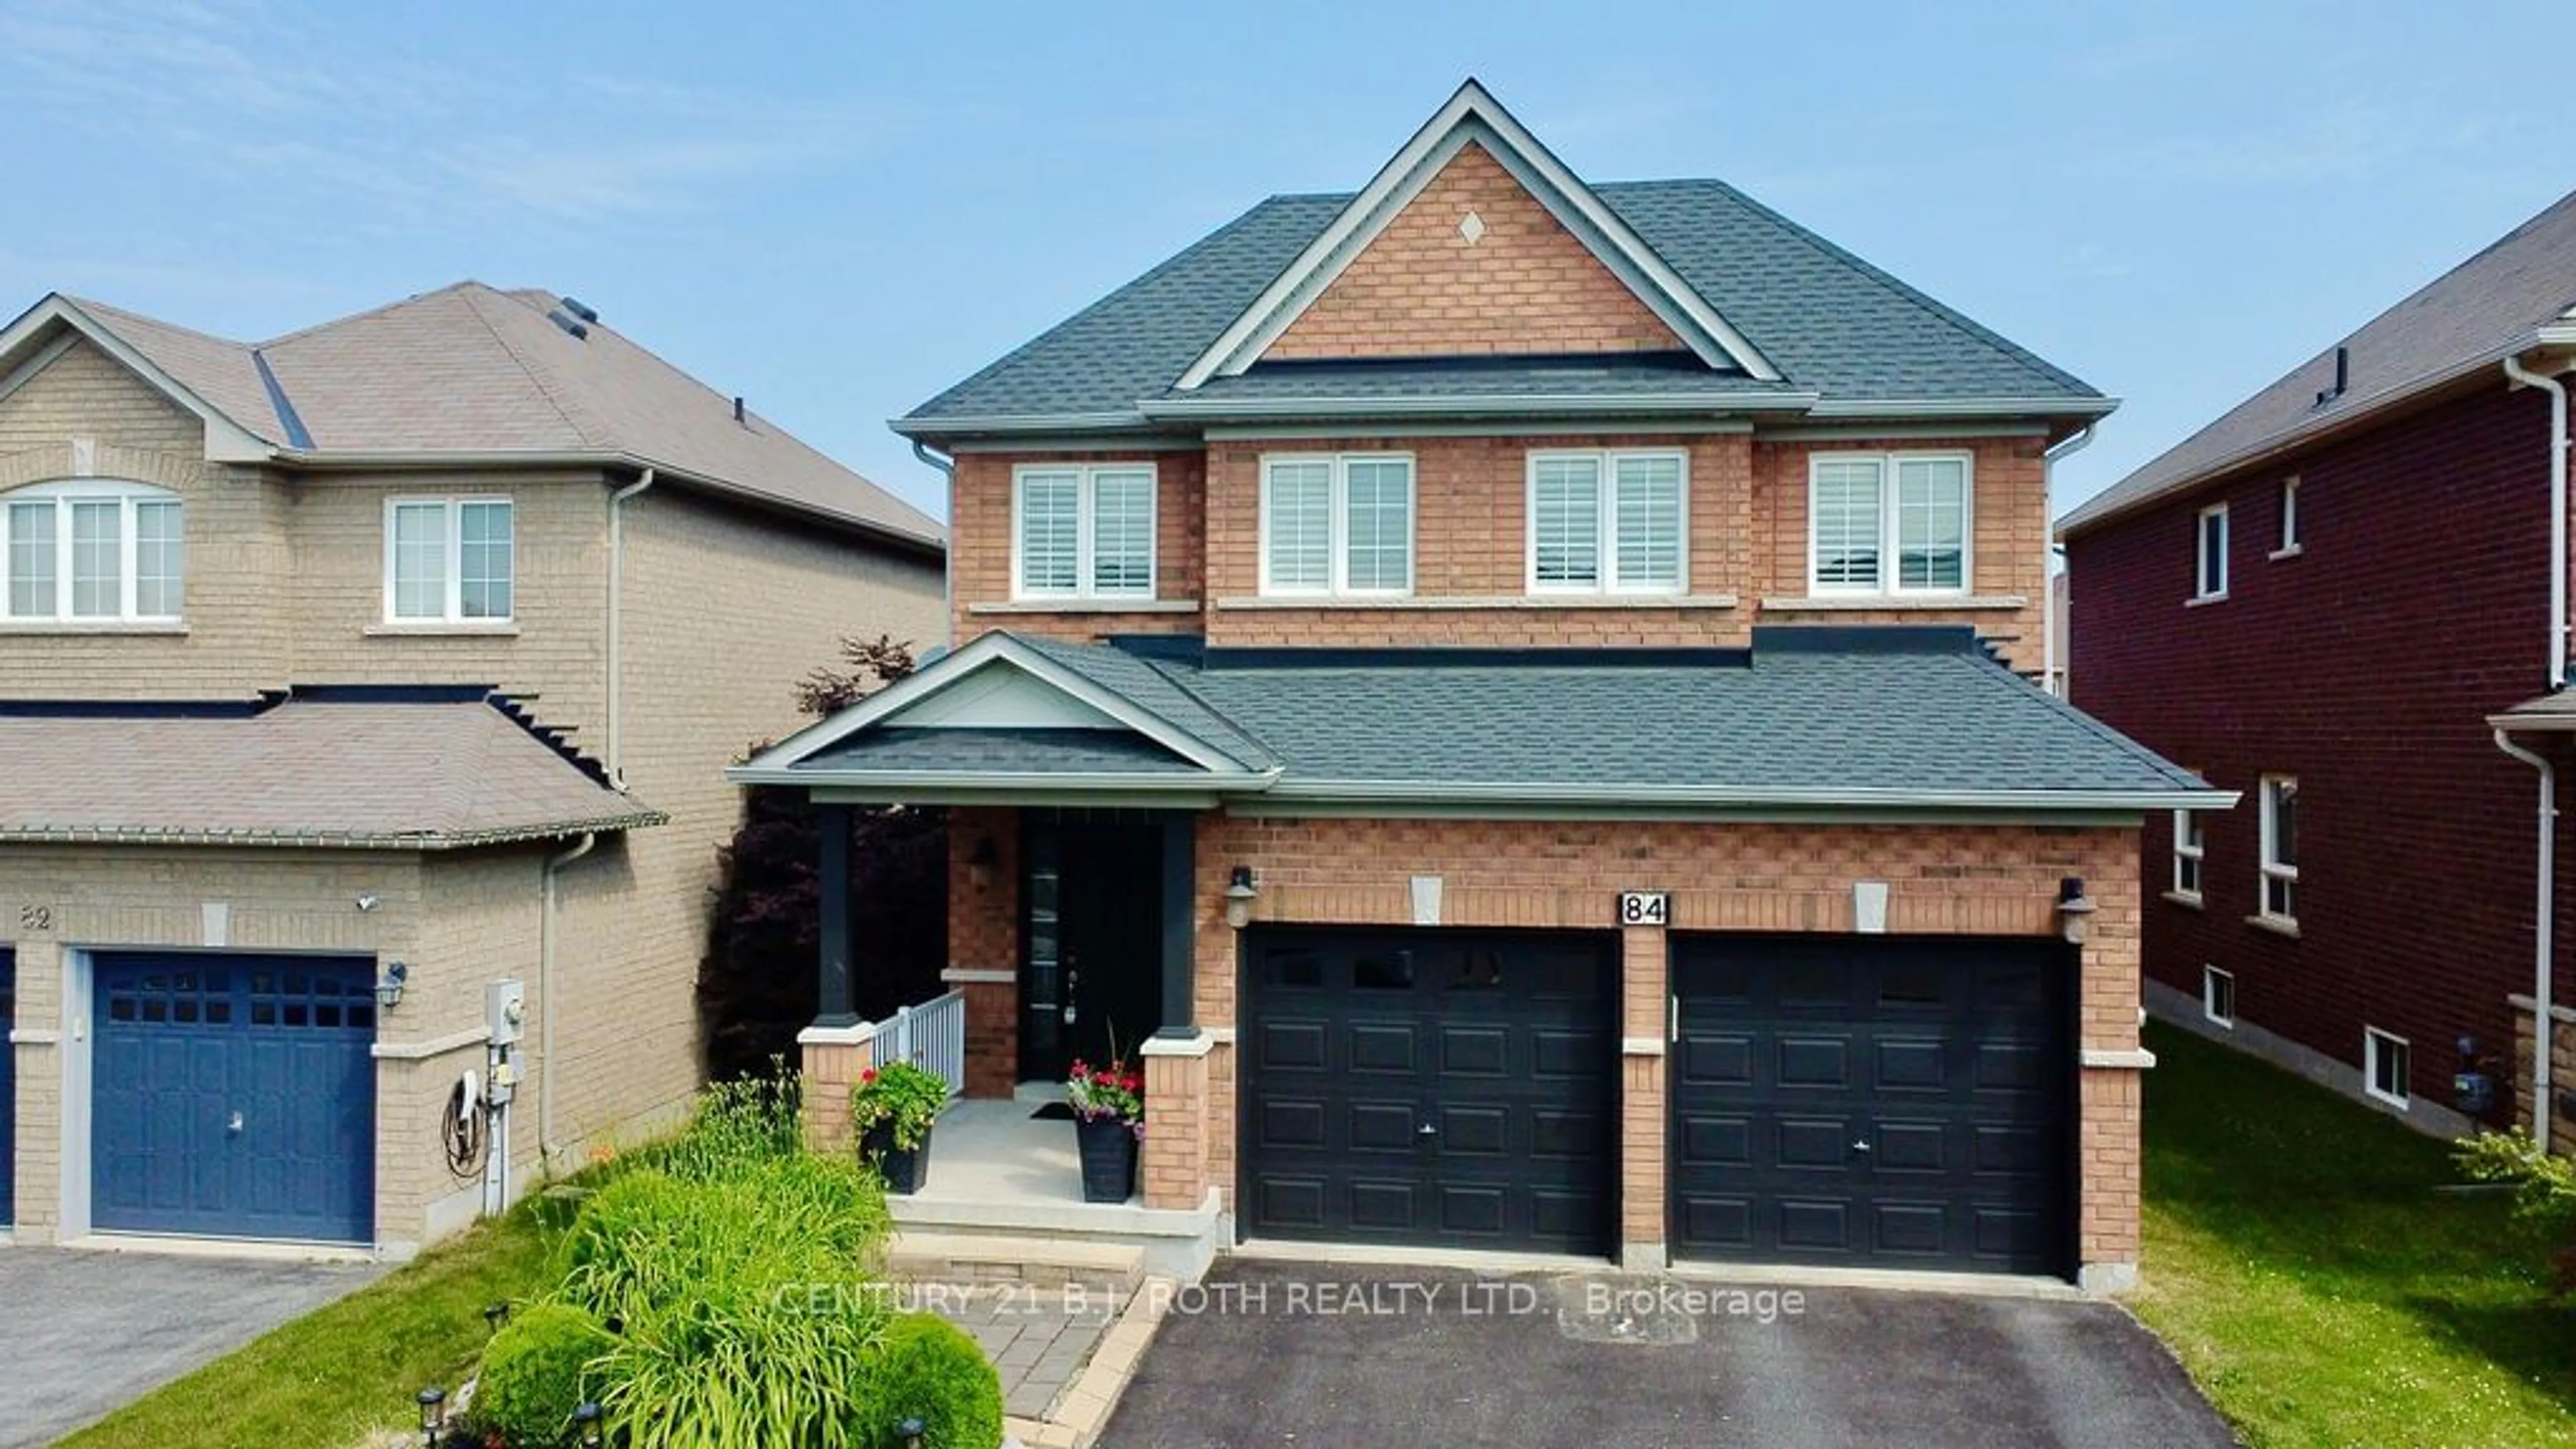 Home with brick exterior material for 84 Monarchy St, Barrie Ontario L4M 0E3